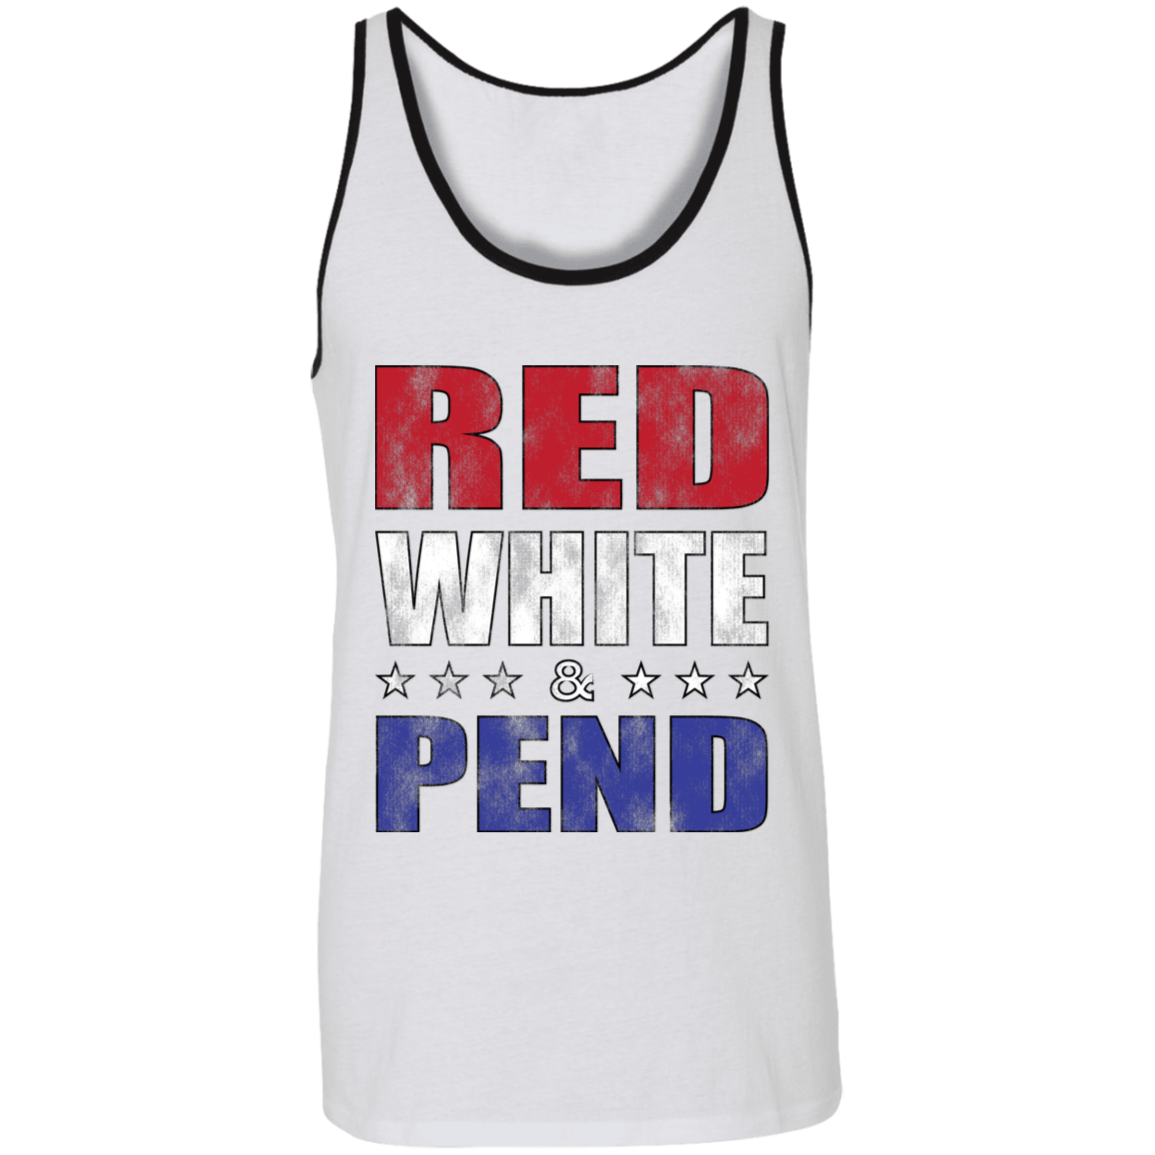 Red White & Pend Tank